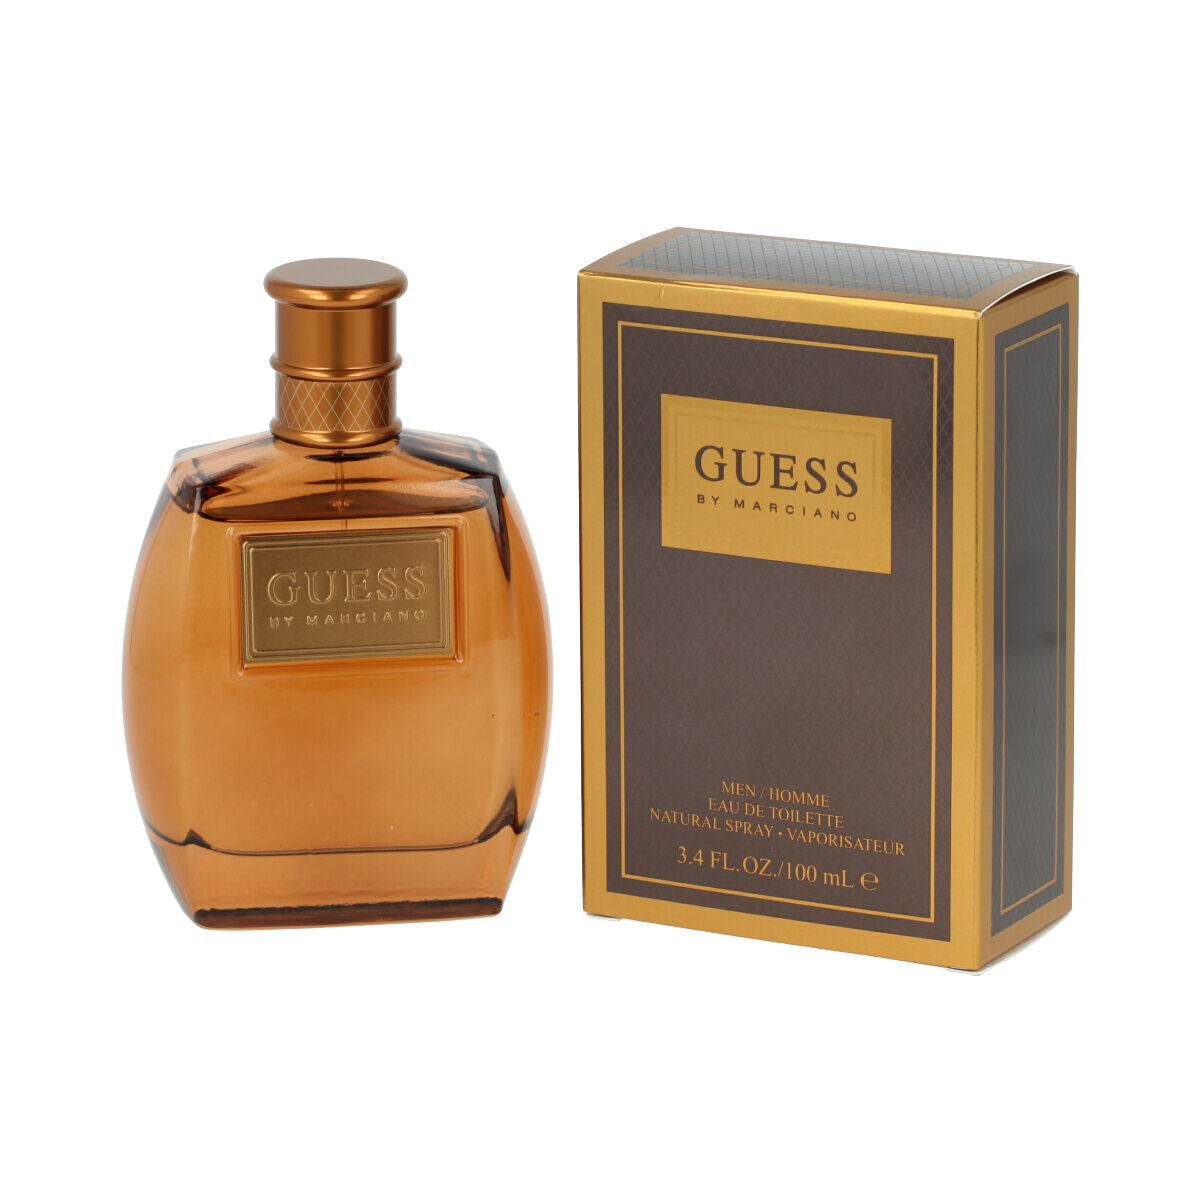 Men's Perfume Guess EDT By Marciano 100 ml-0